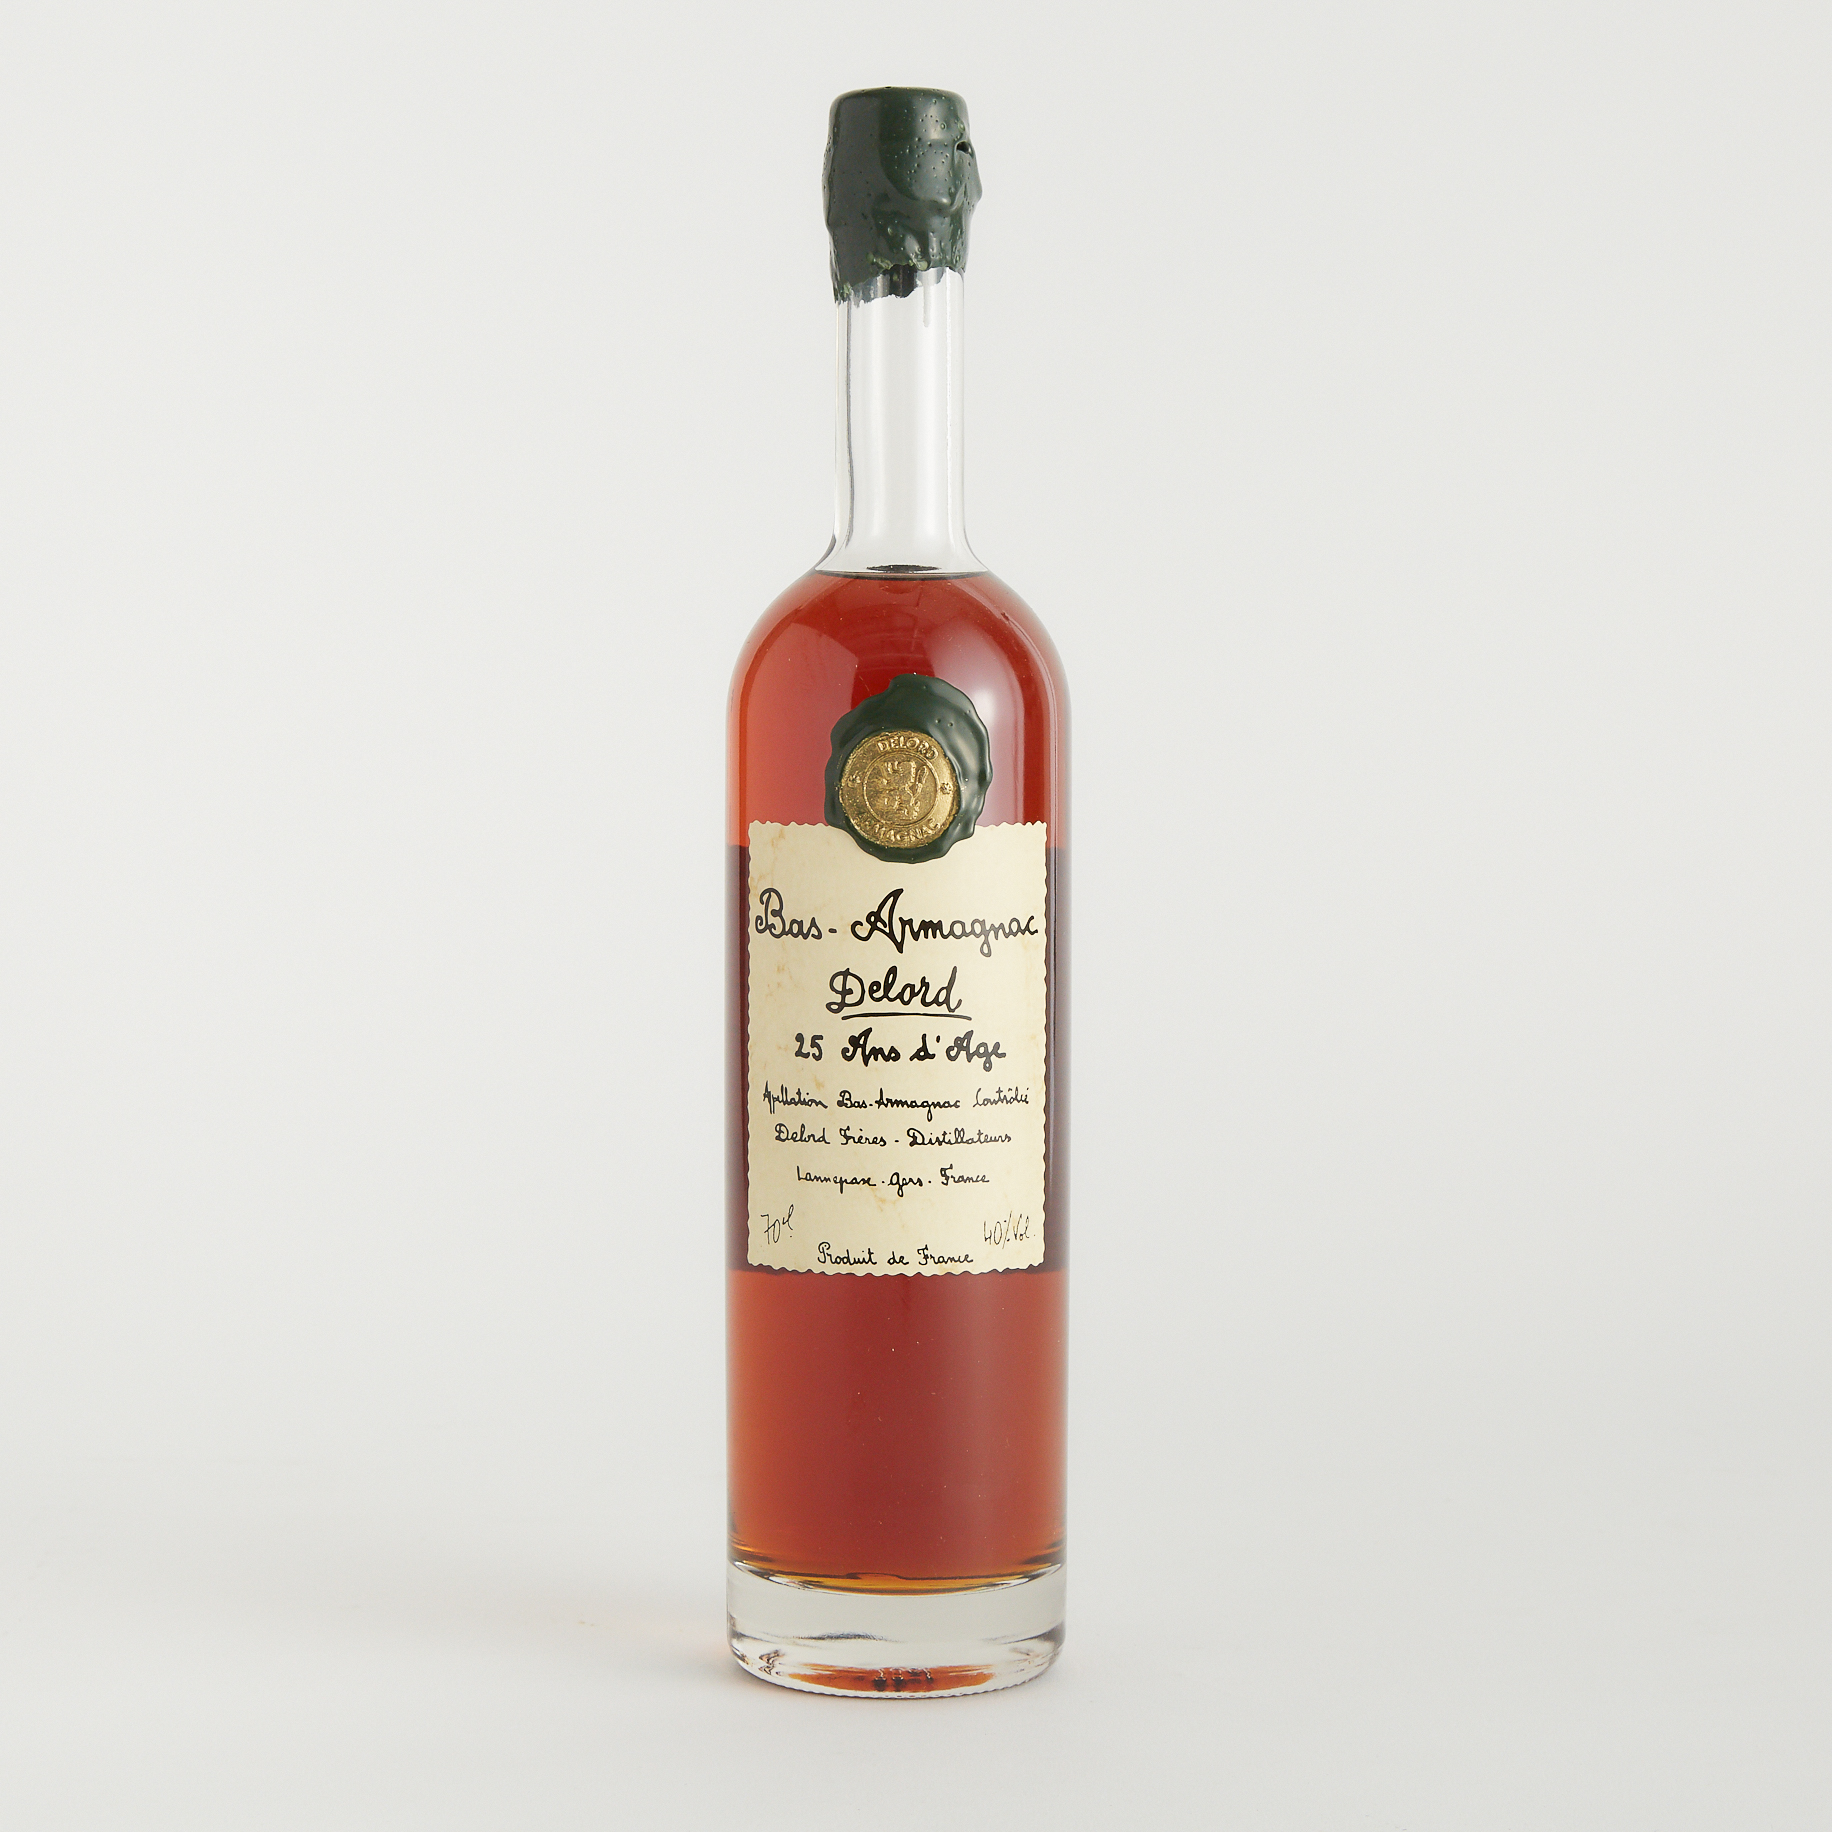 DELORD BAS-ARMAGNAC 25 YEARS (ONE 700 ML)